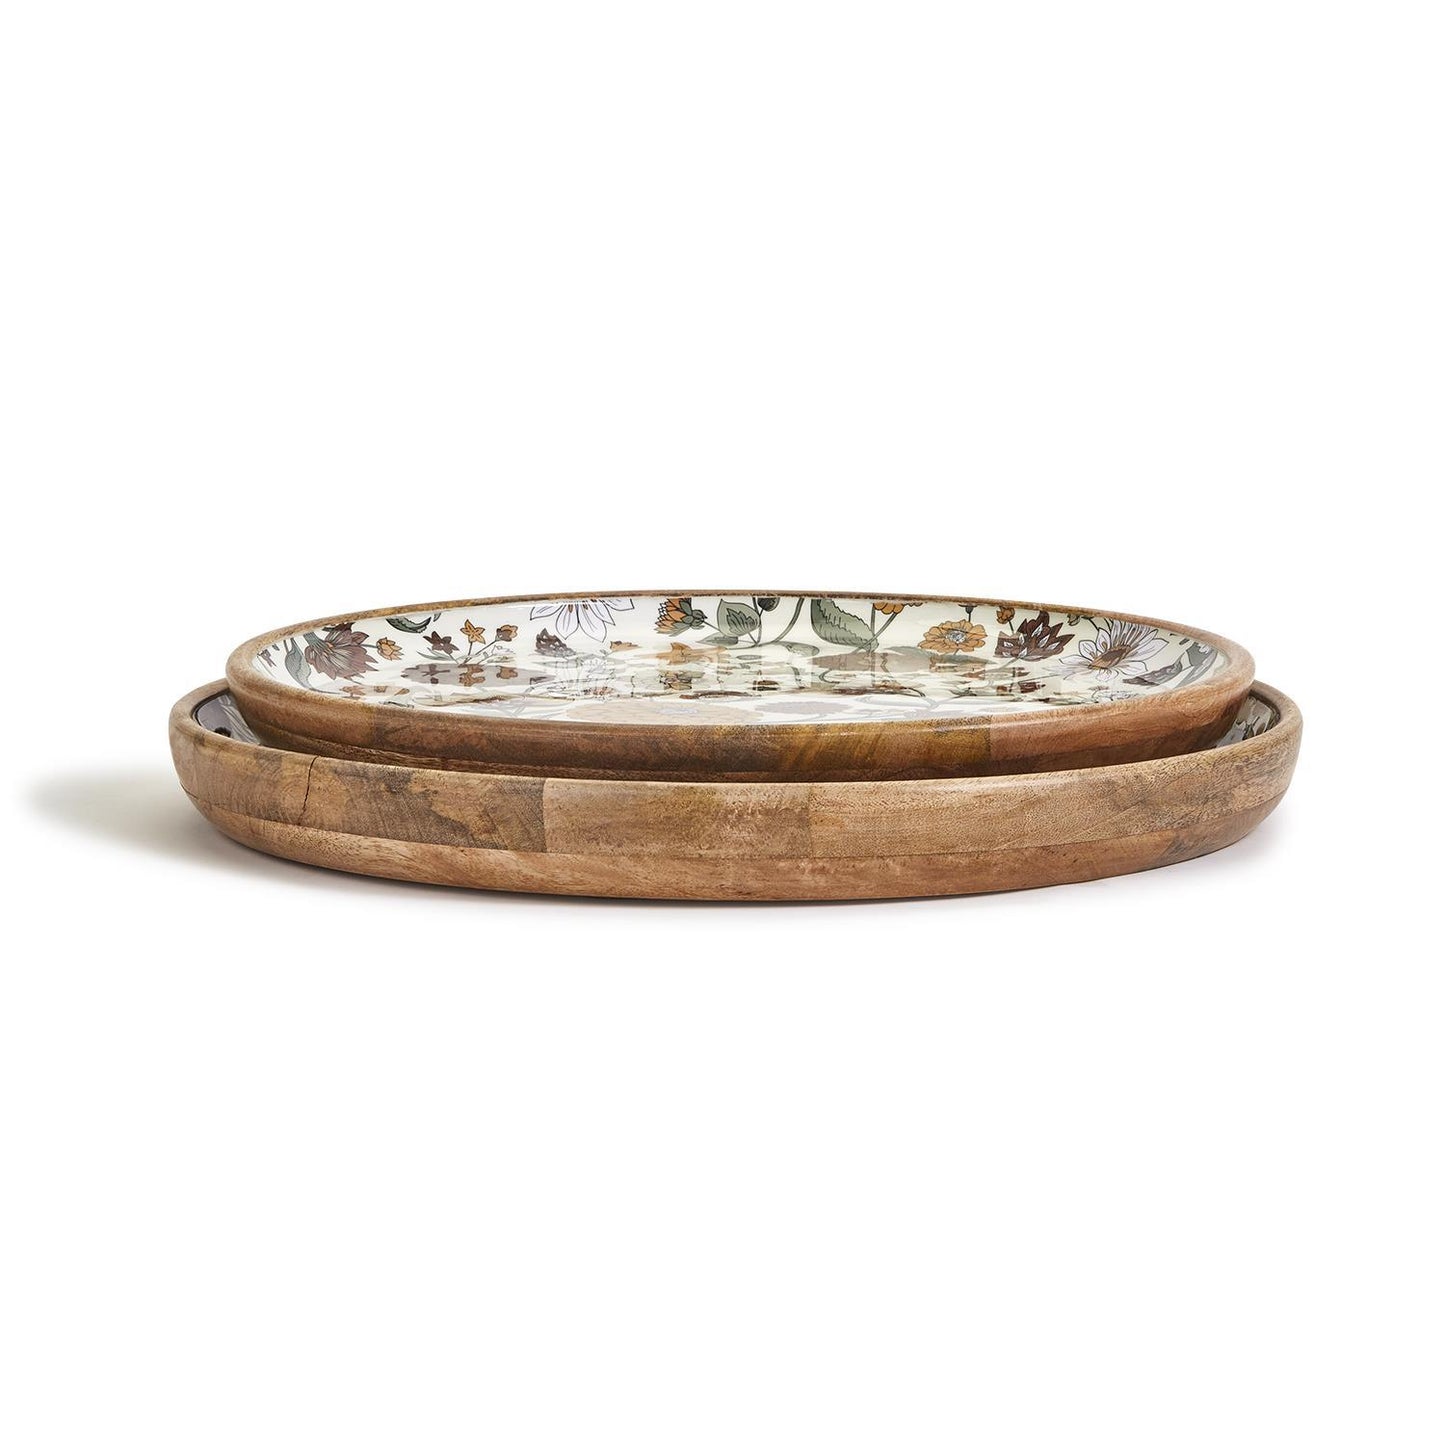 Two's Company Naturally Floral Set Of 2 Hand-Crafted Wood Round Trays